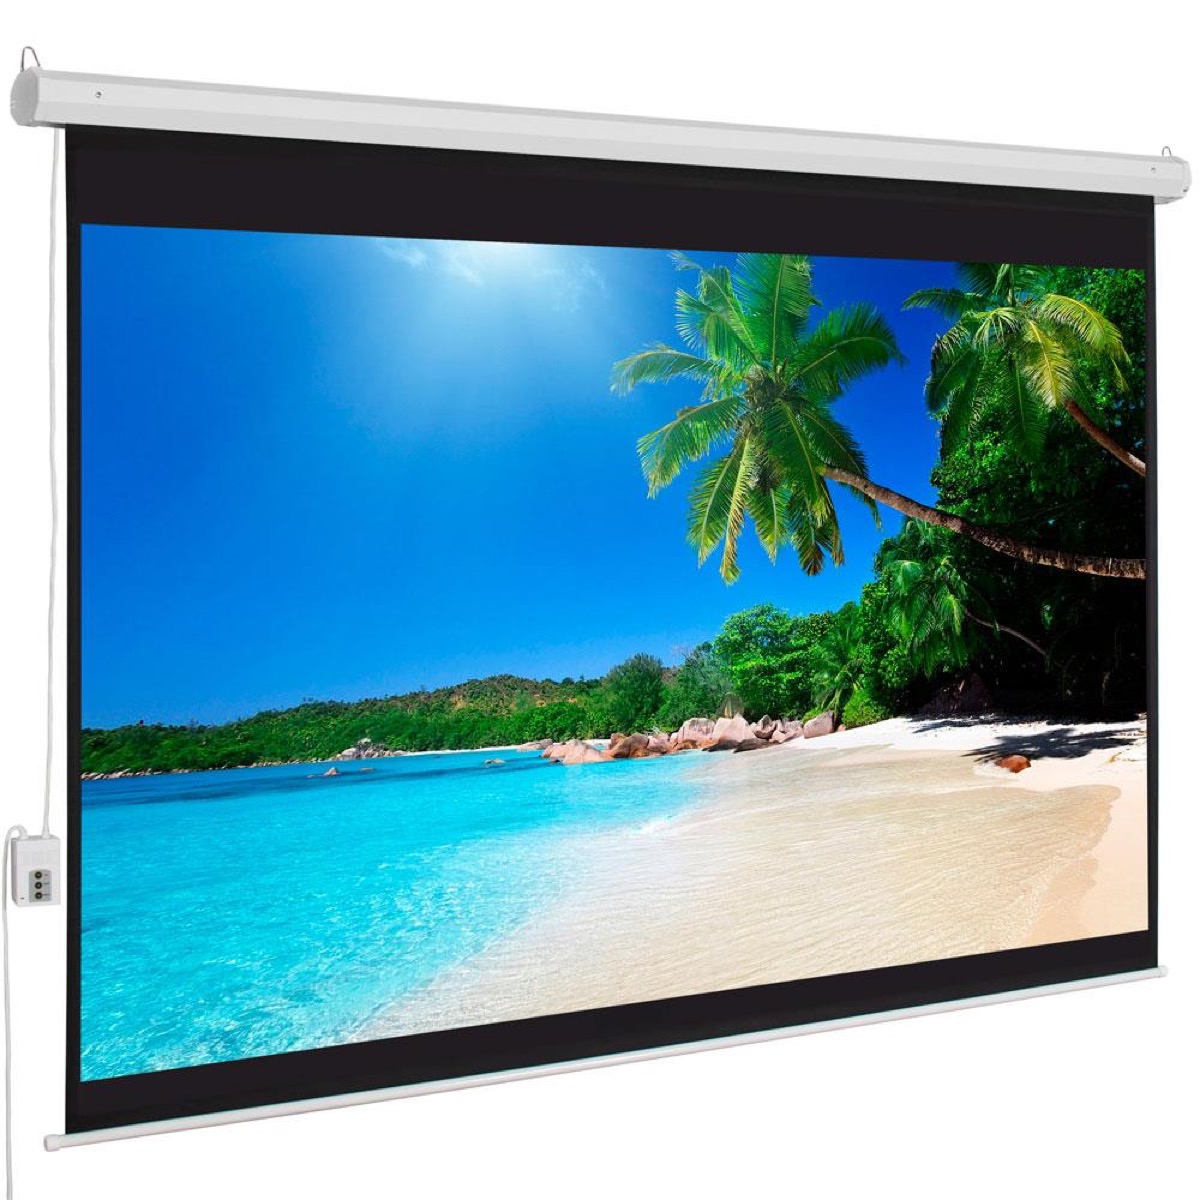 Motorized projector screen with beach image